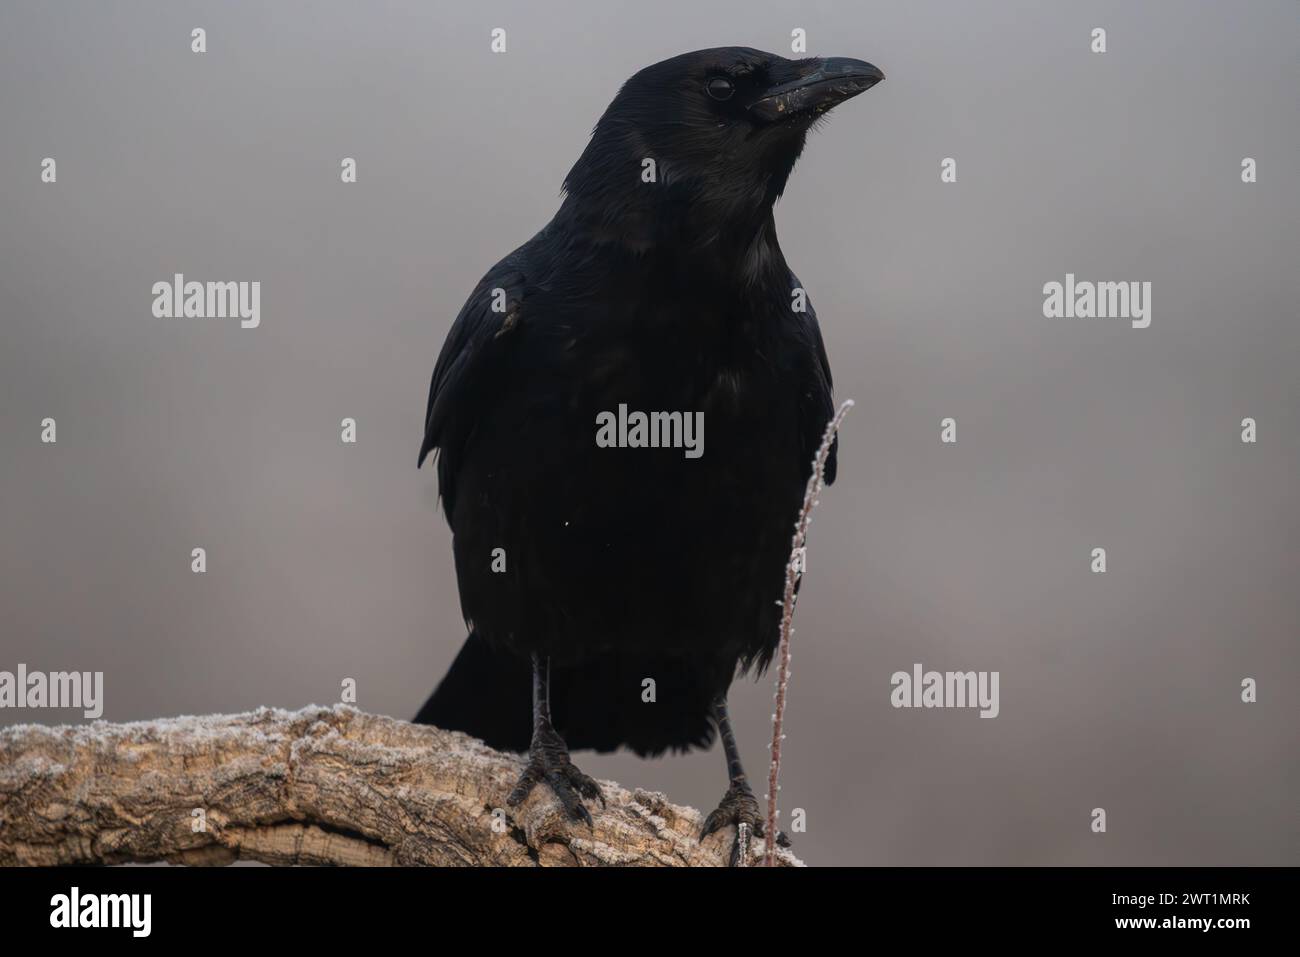 Beautiful portrait of black crow perched on the trunk or branch of a tree in a landscape full of mist and fog in Spain, Europe Stock Photo